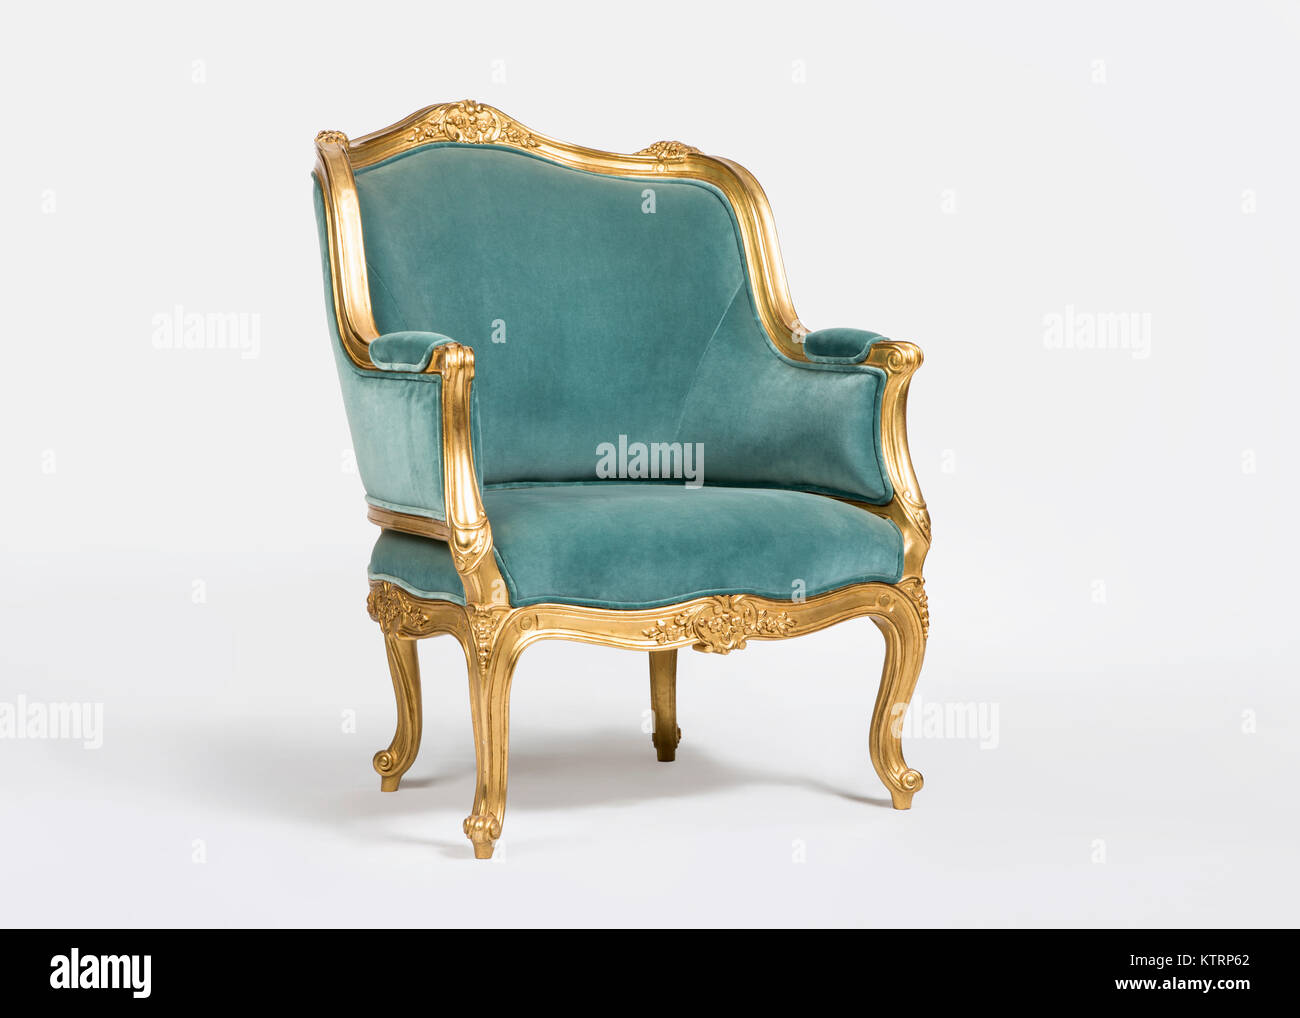 Golden and light blue classic armchair isolated on white background Stock Photo